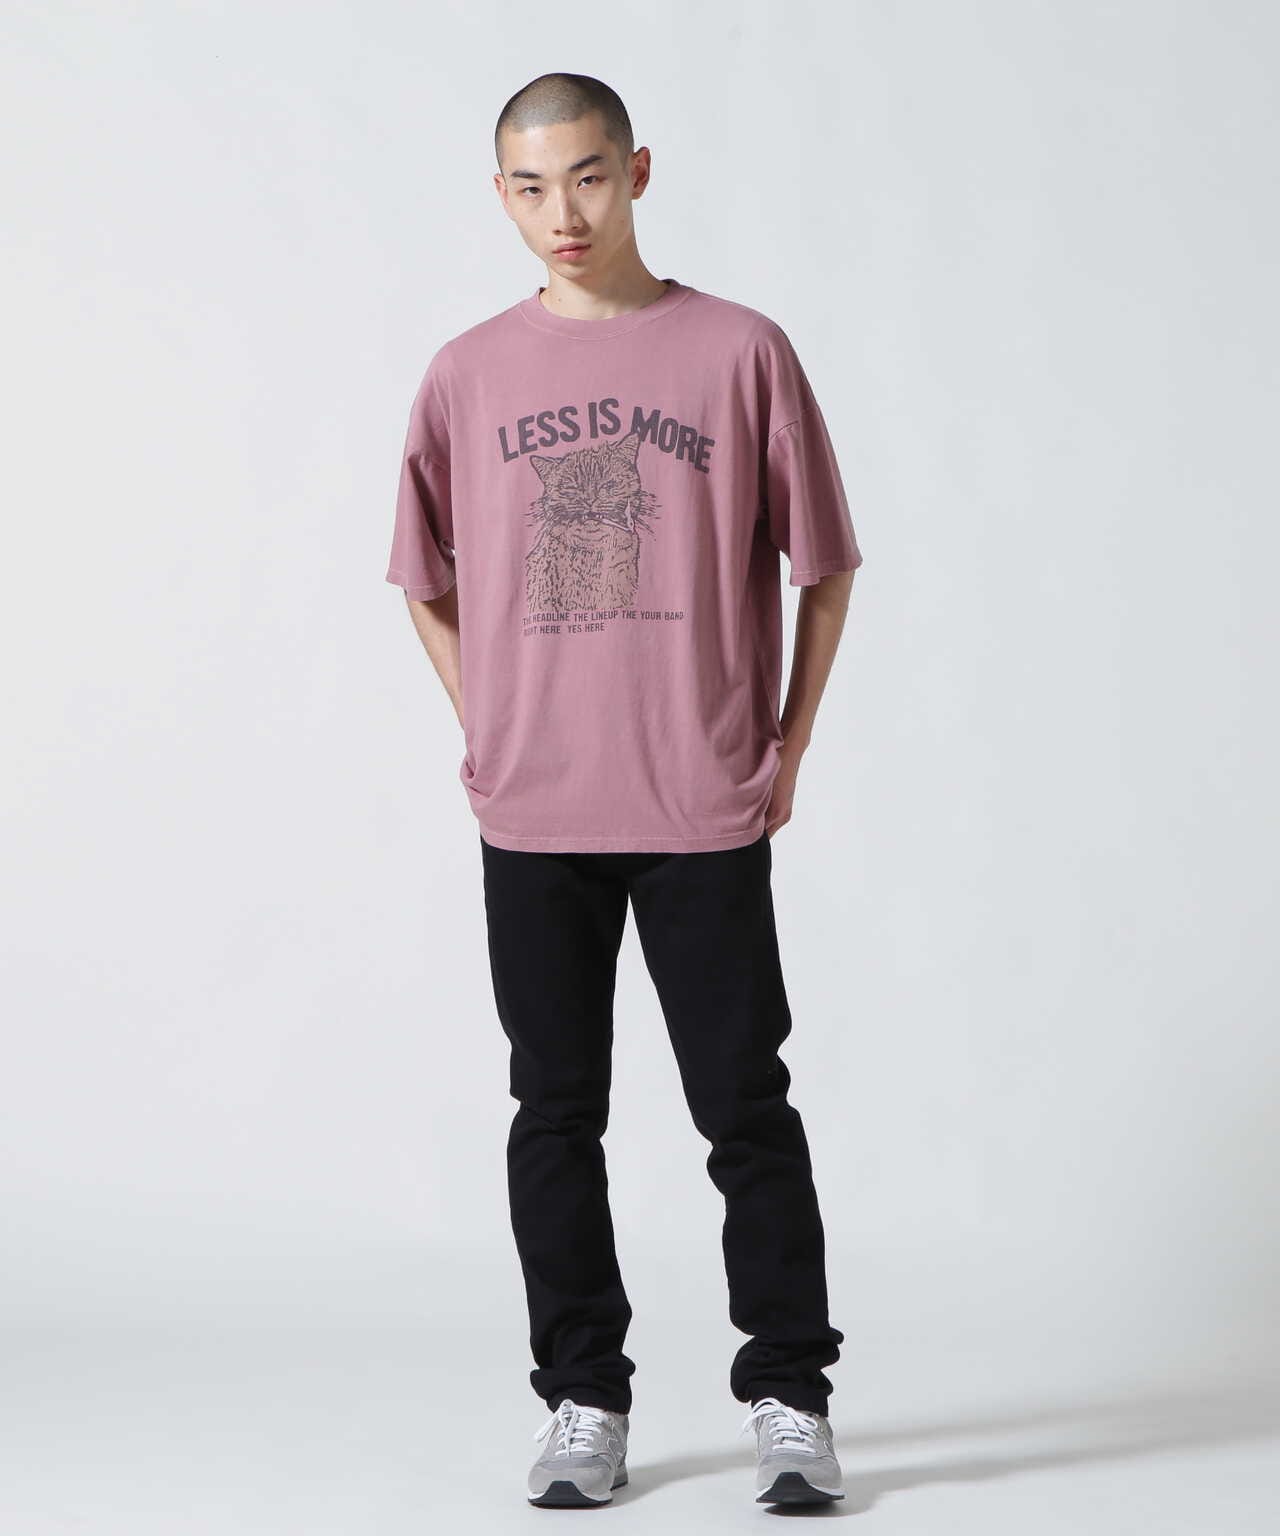 REMI RELIEF レミレリーフ LESS IS MORE L/S T-SH配送